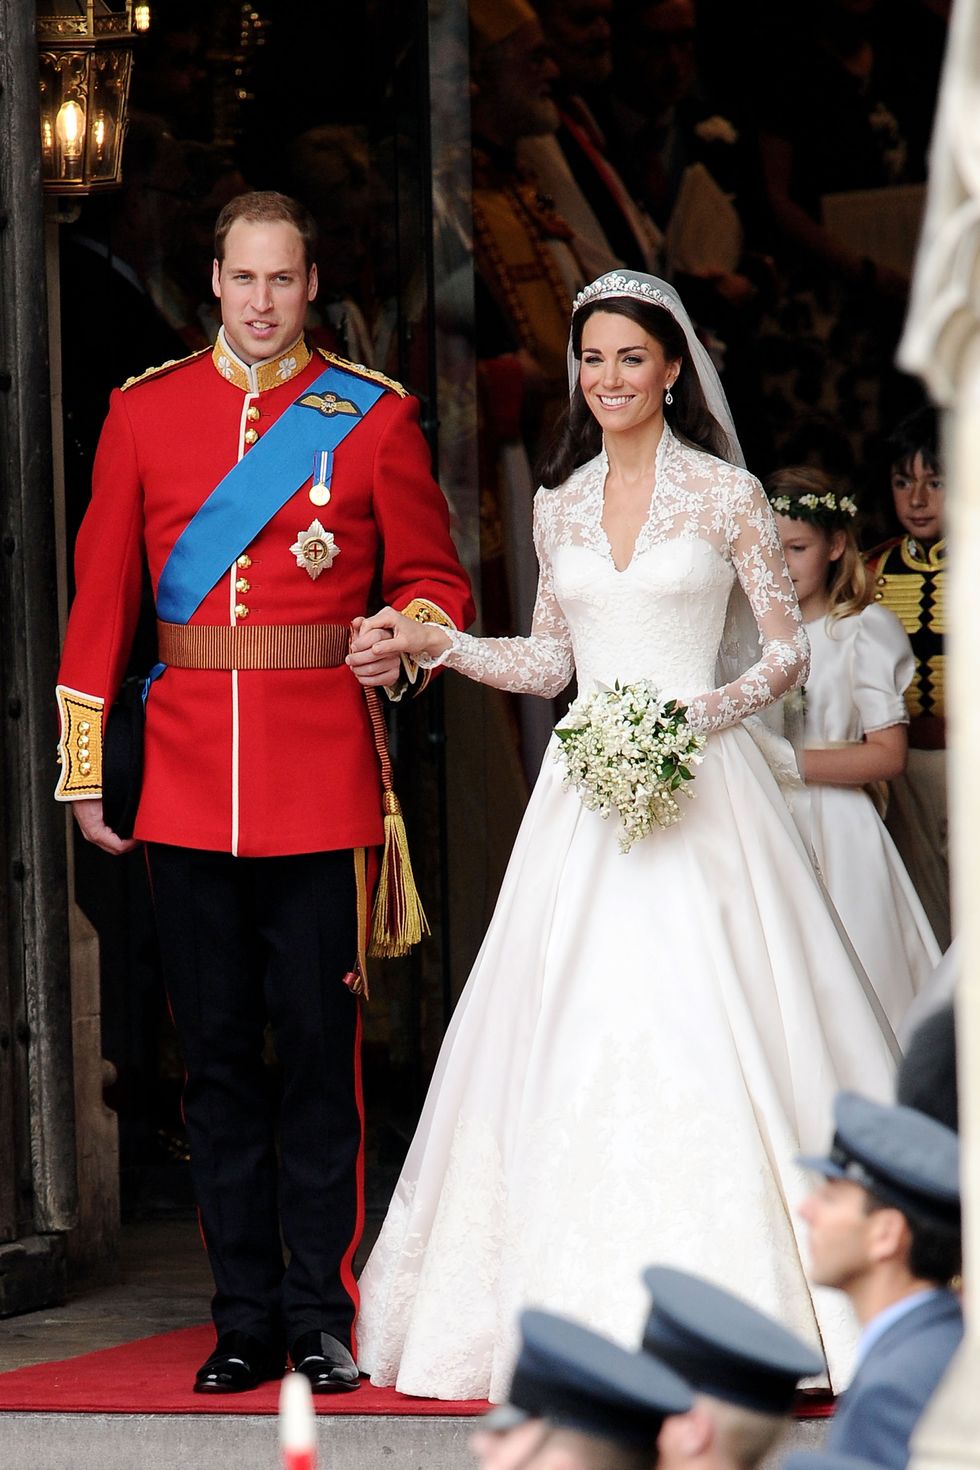 Meghan Markle Royal Wedding Dress Cost - How Much Does Meghan Markle's ...